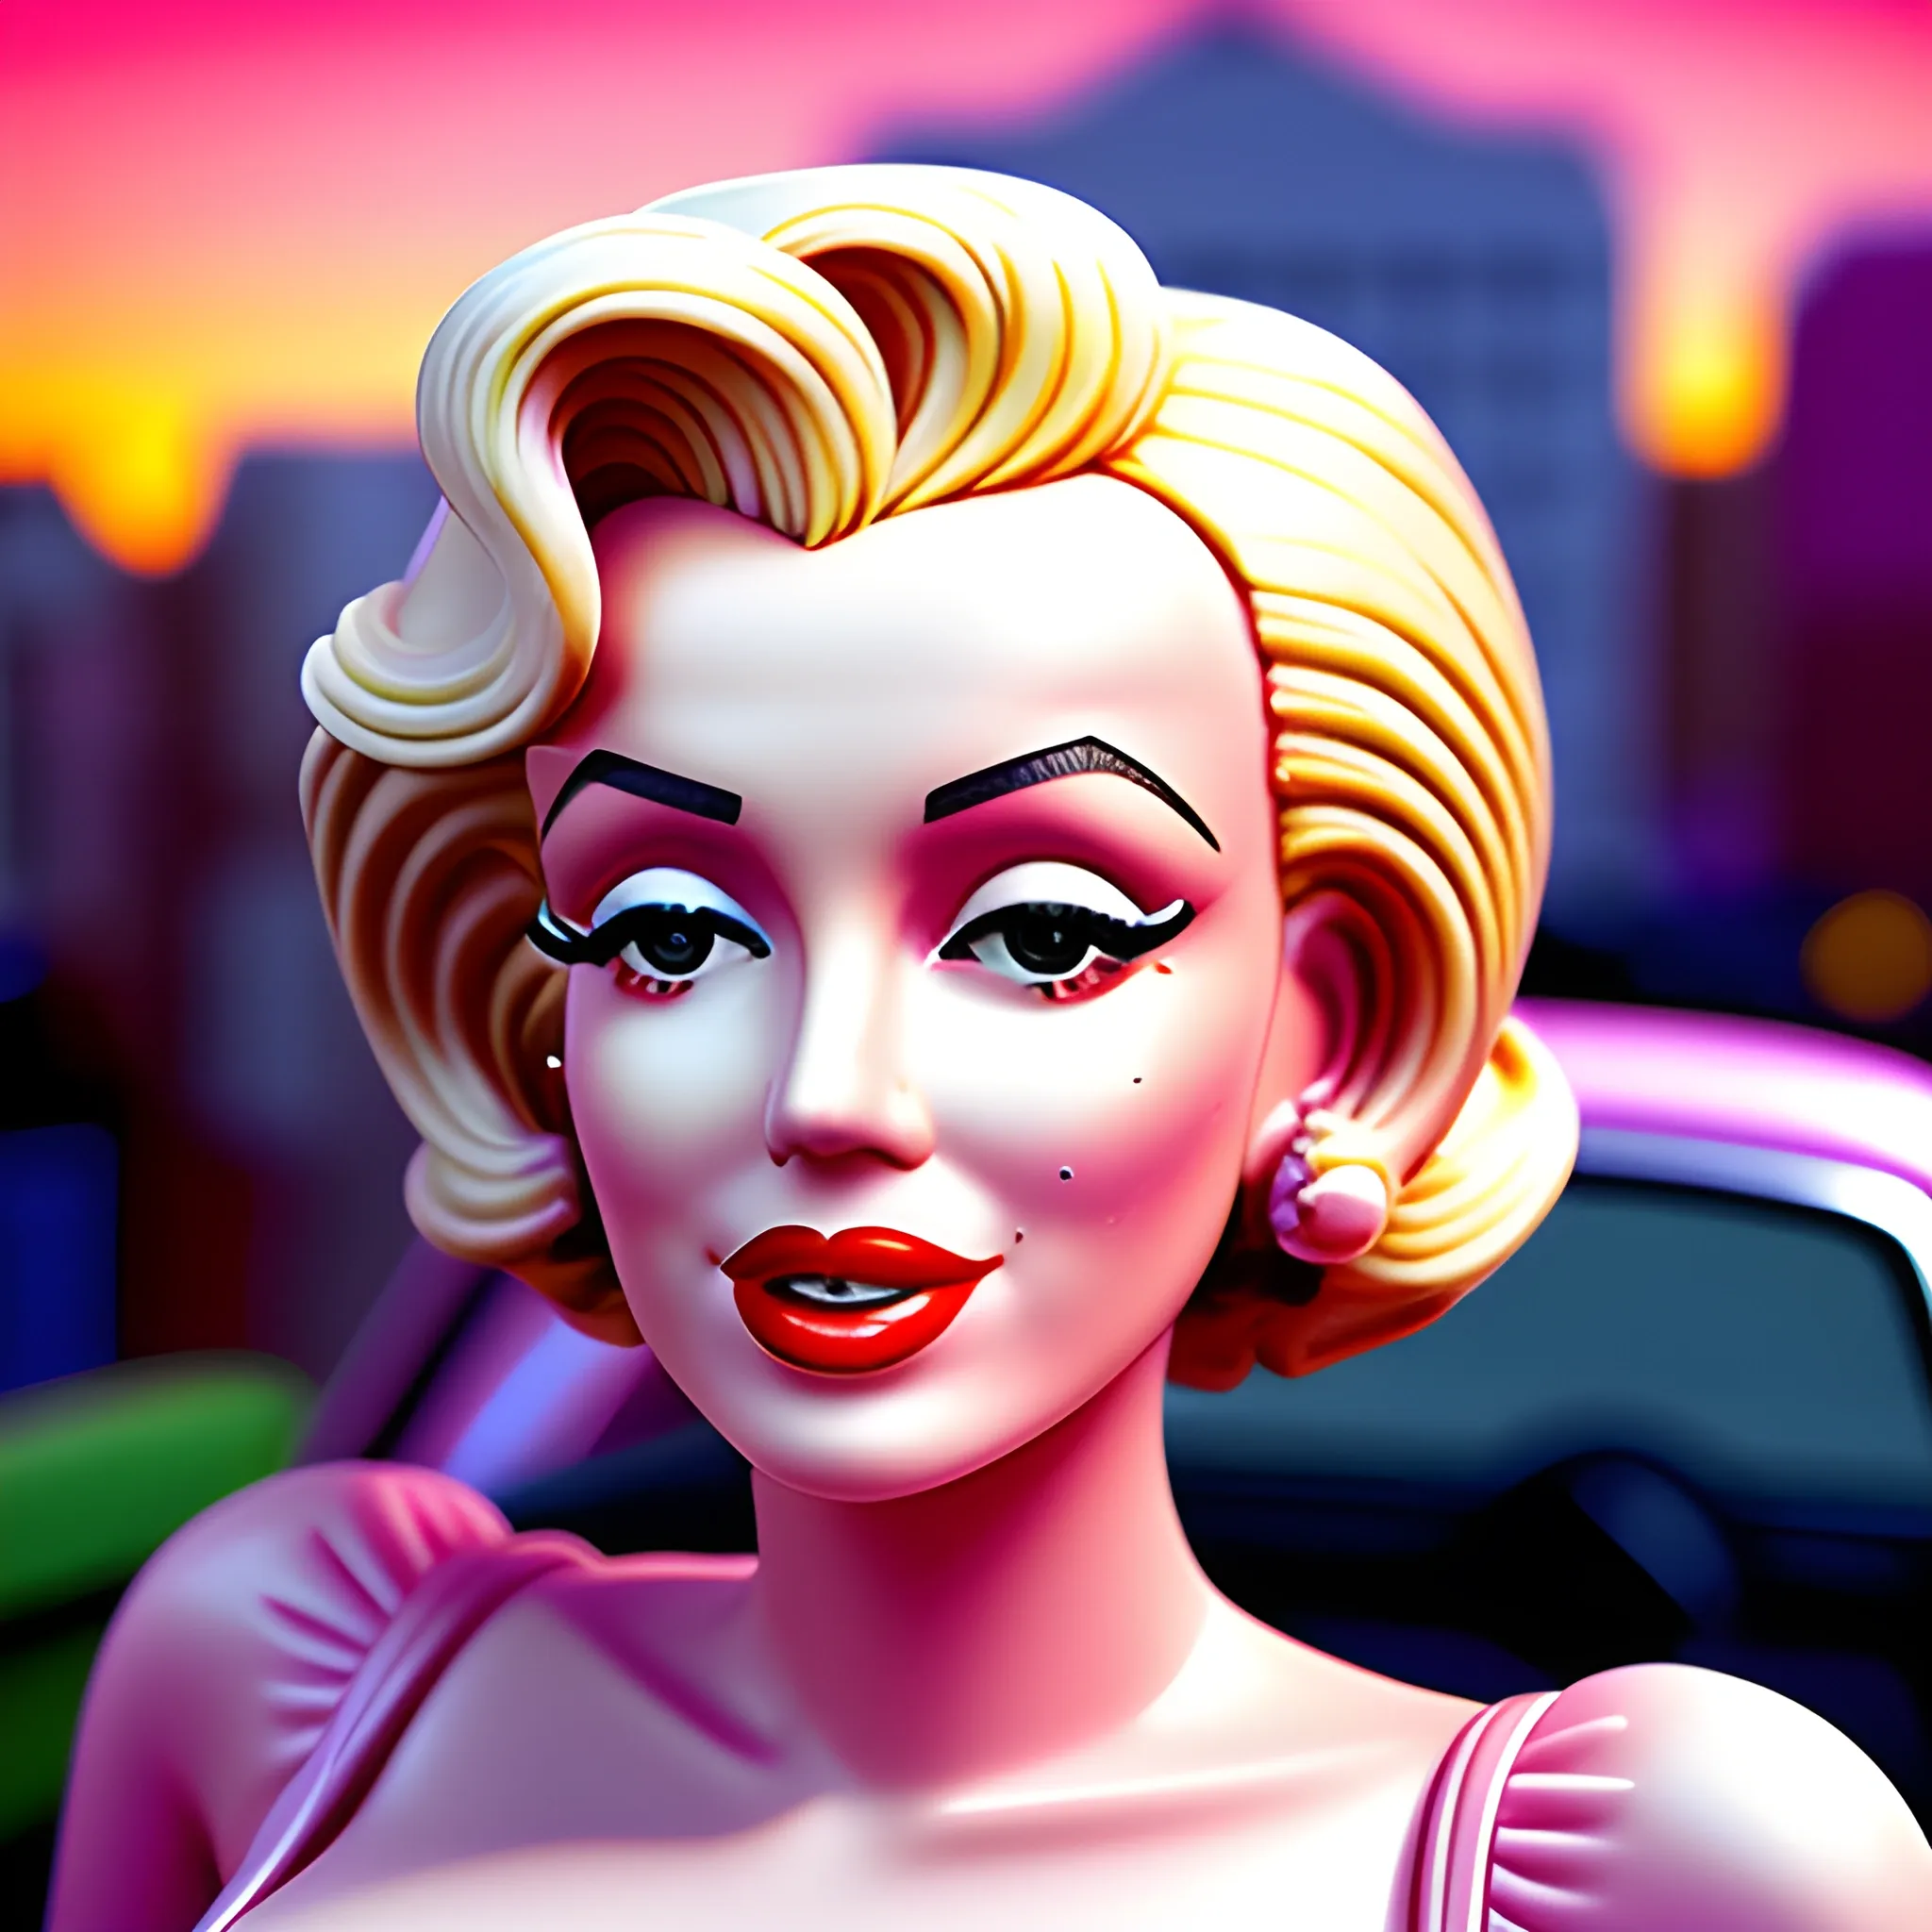 close-up portrait of plastic Marilyn Monroe, as a figurine, plastic skin, plastic hair, plastic cloths, in a plastic car, surrounded by beautiful plastic pink neighborhood, painted sunset. plastic texture, Inspired by Barbie movie, award winning design, soft light, dreamy atmosphere, childhood nostalgia, kitsch